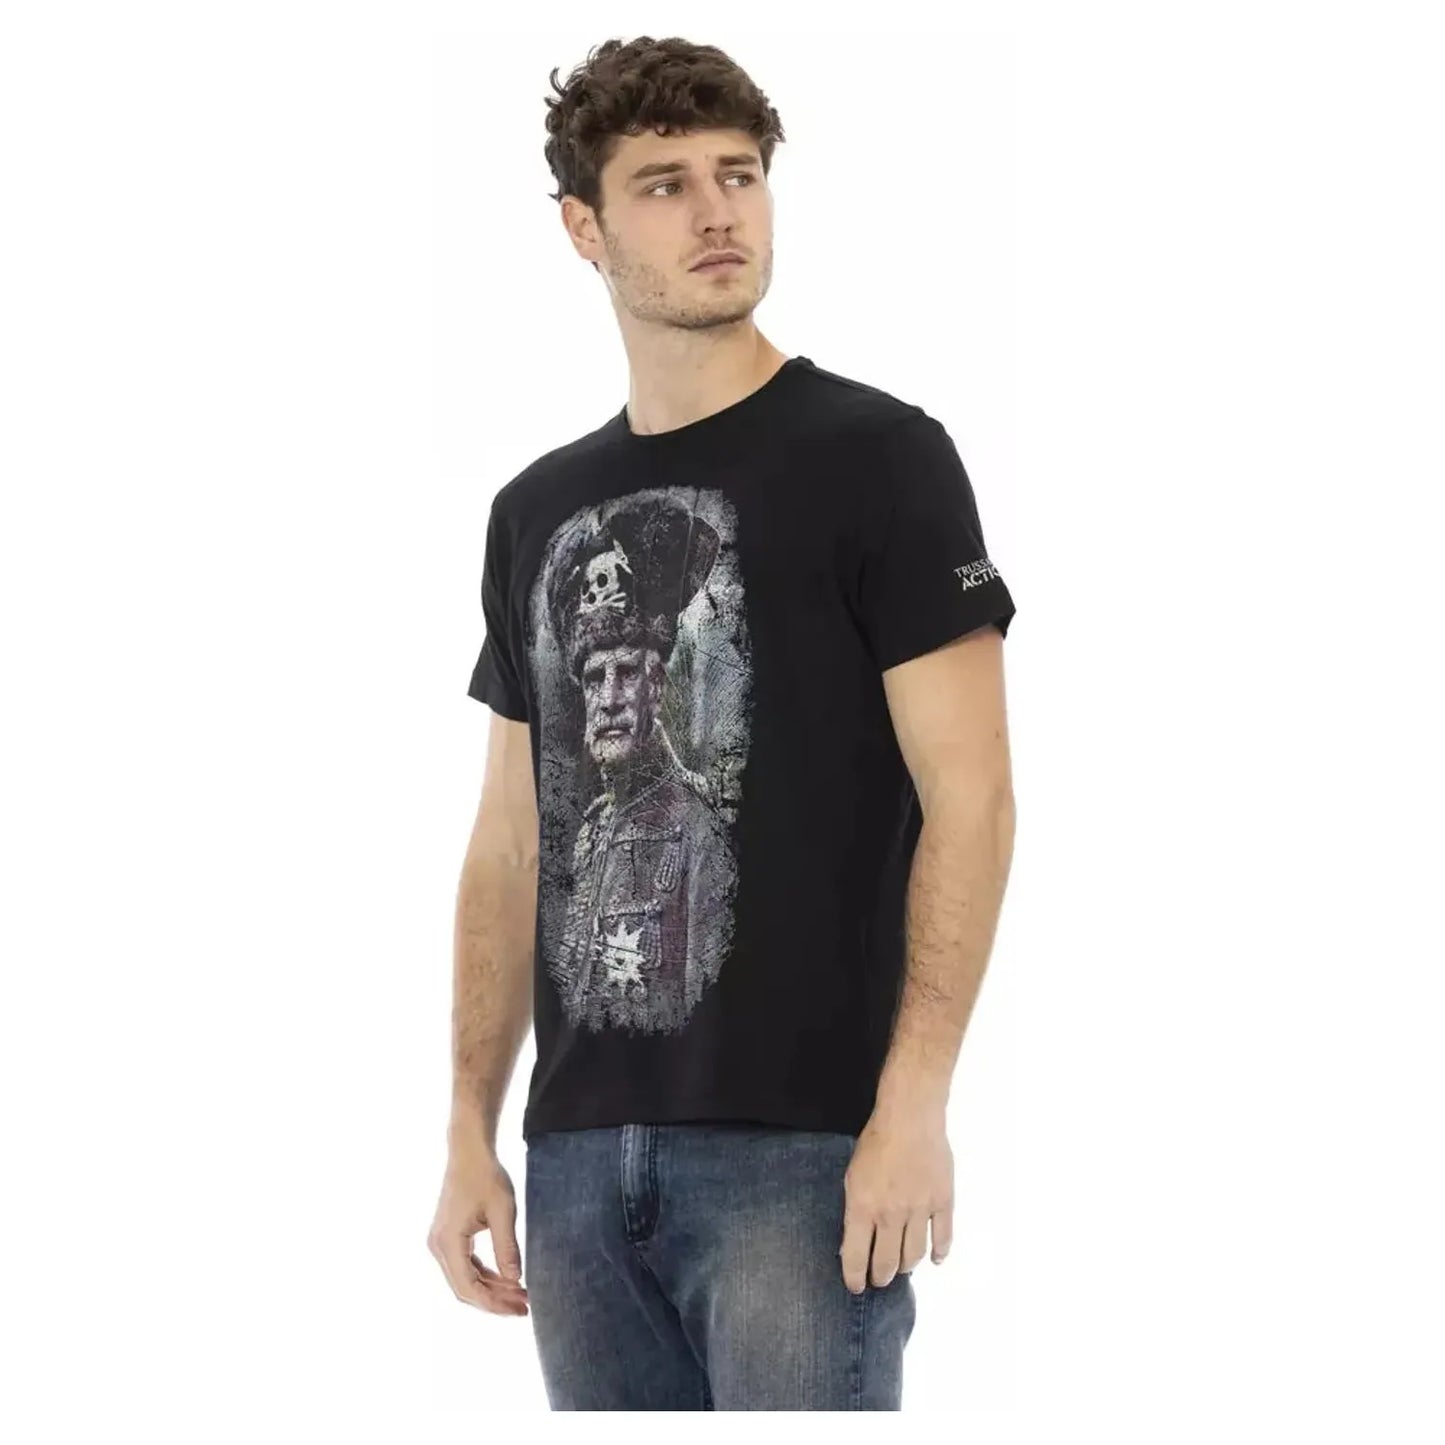 Trussardi Action Sleek Black Graphic Tee with Artistic Flair black-cotton-t-shirt-26 product-22691-861277494-19-54e3bcee-534.webp